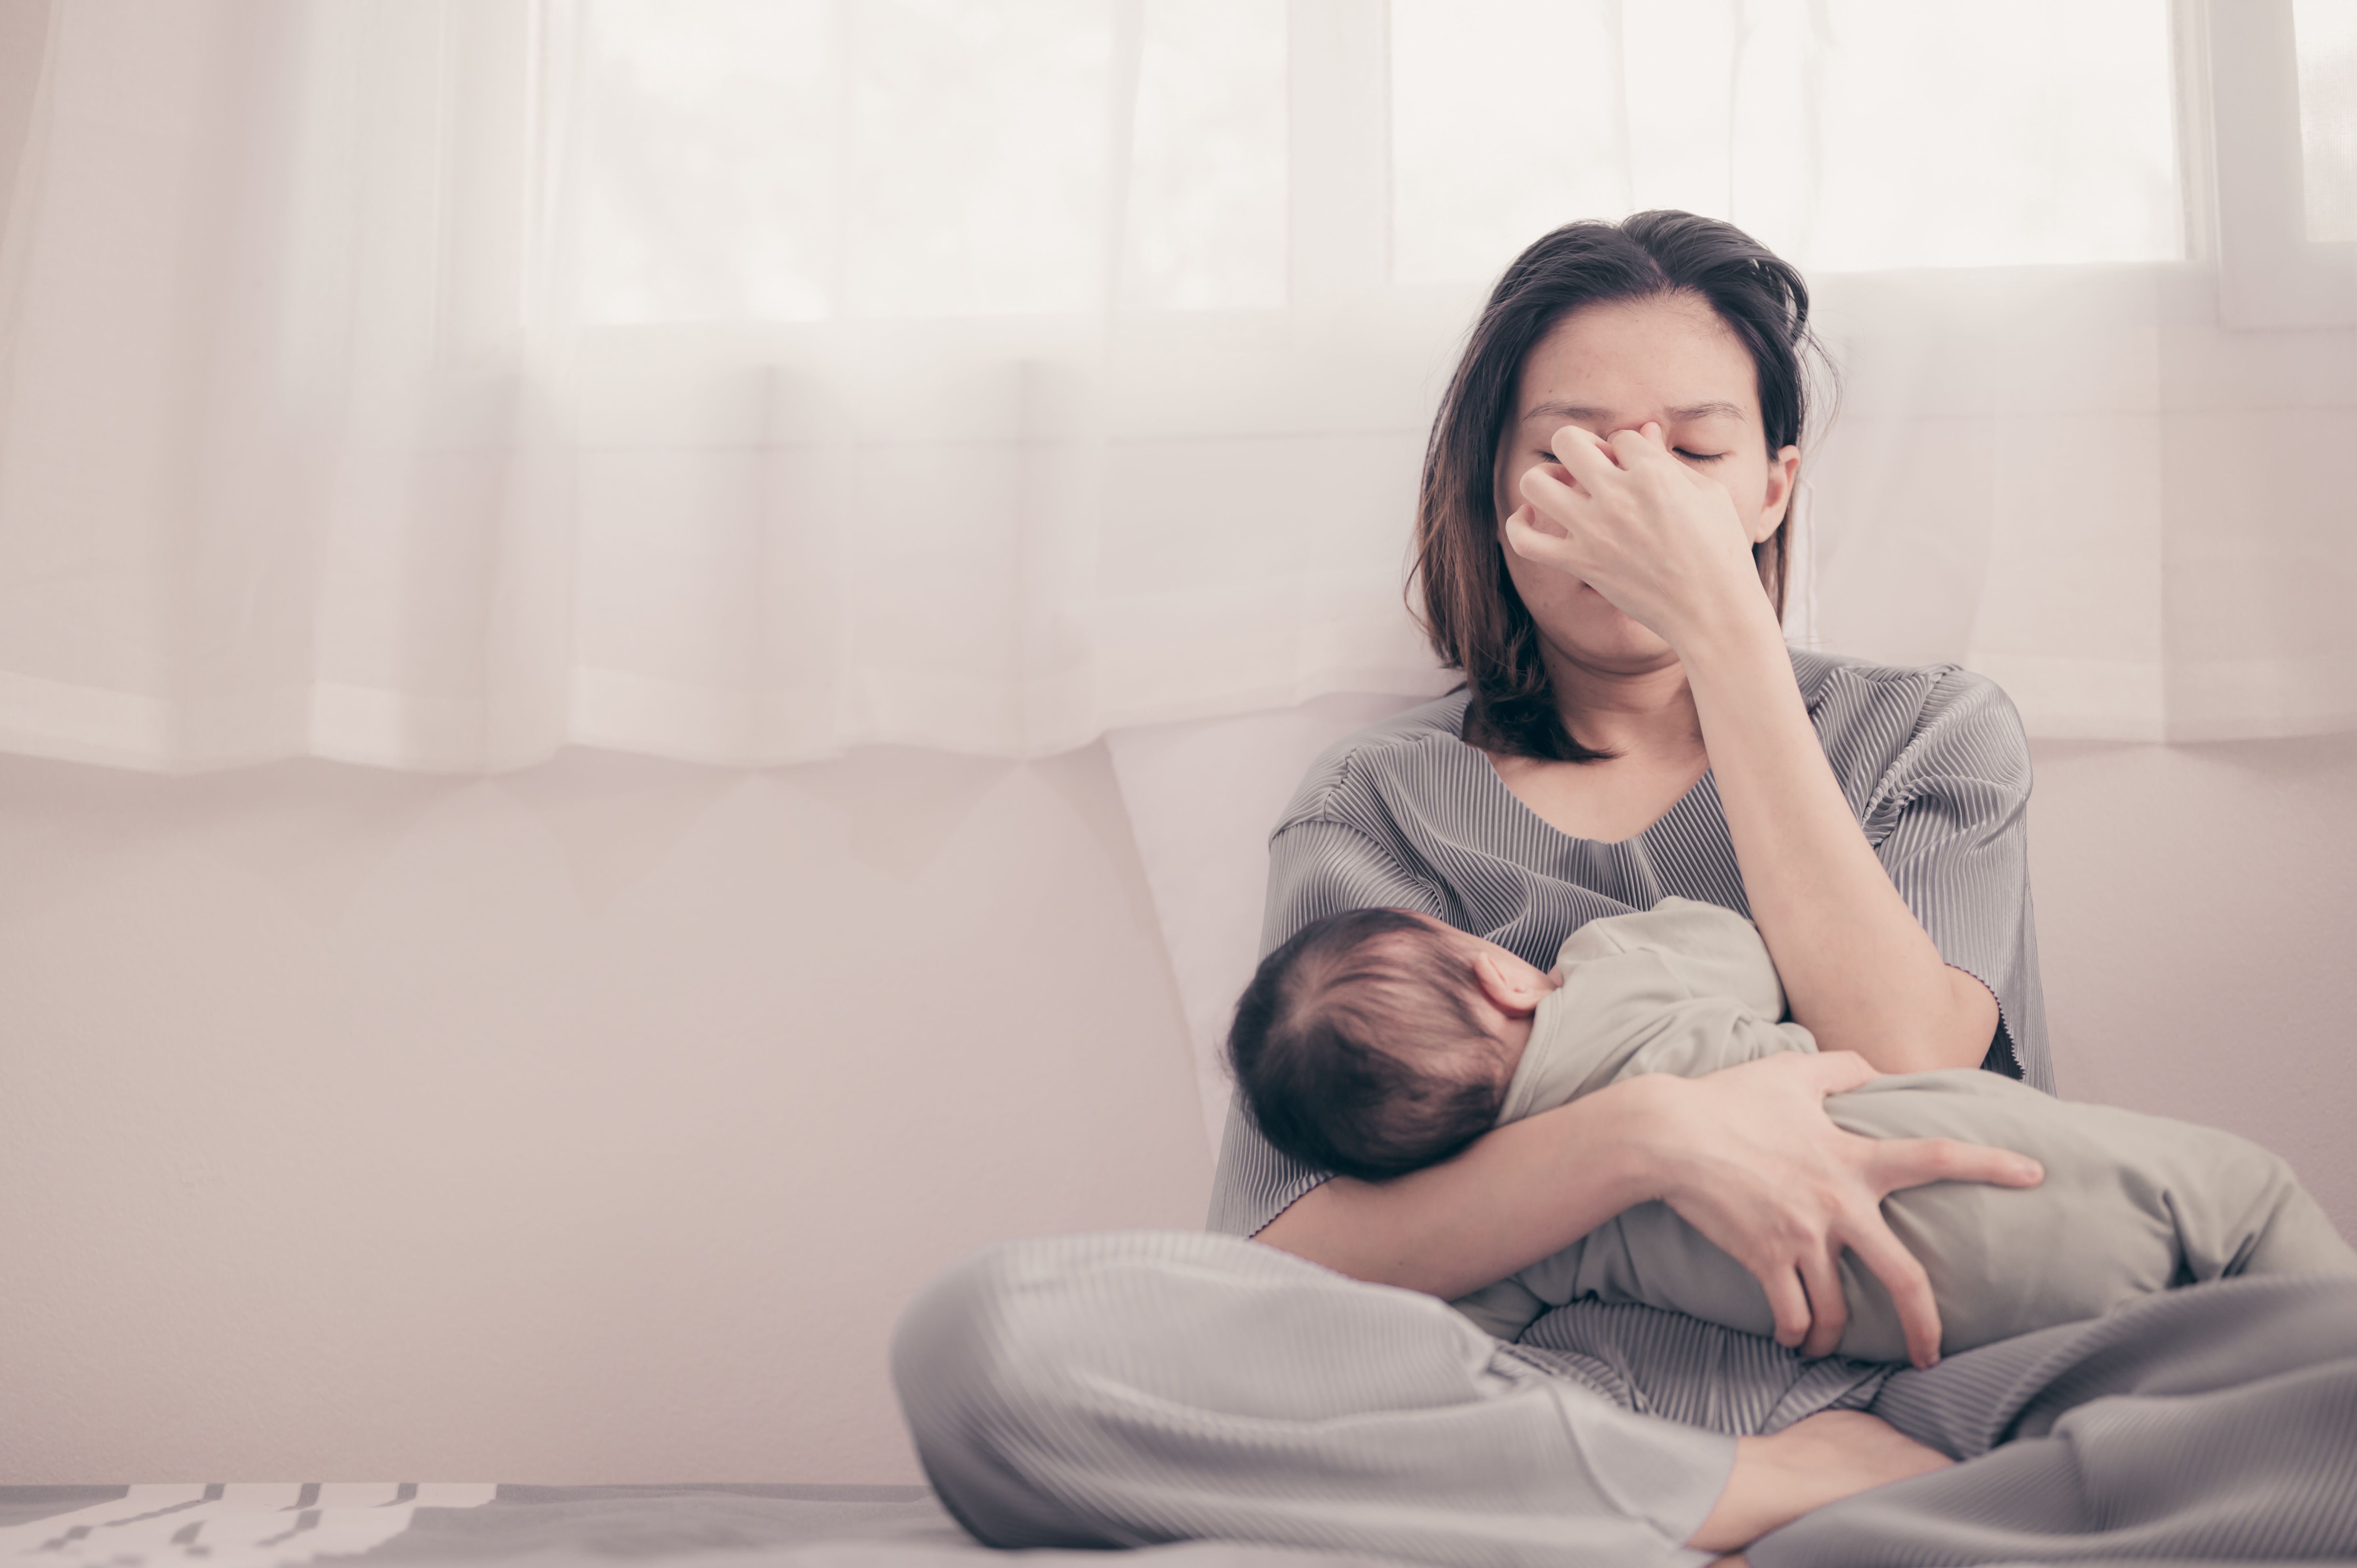 Tired Mother Suffering from experiencing postnatal depression.Health care single mom motherhood stressful | Image credit: Grooveriderz - stock.adobe.com